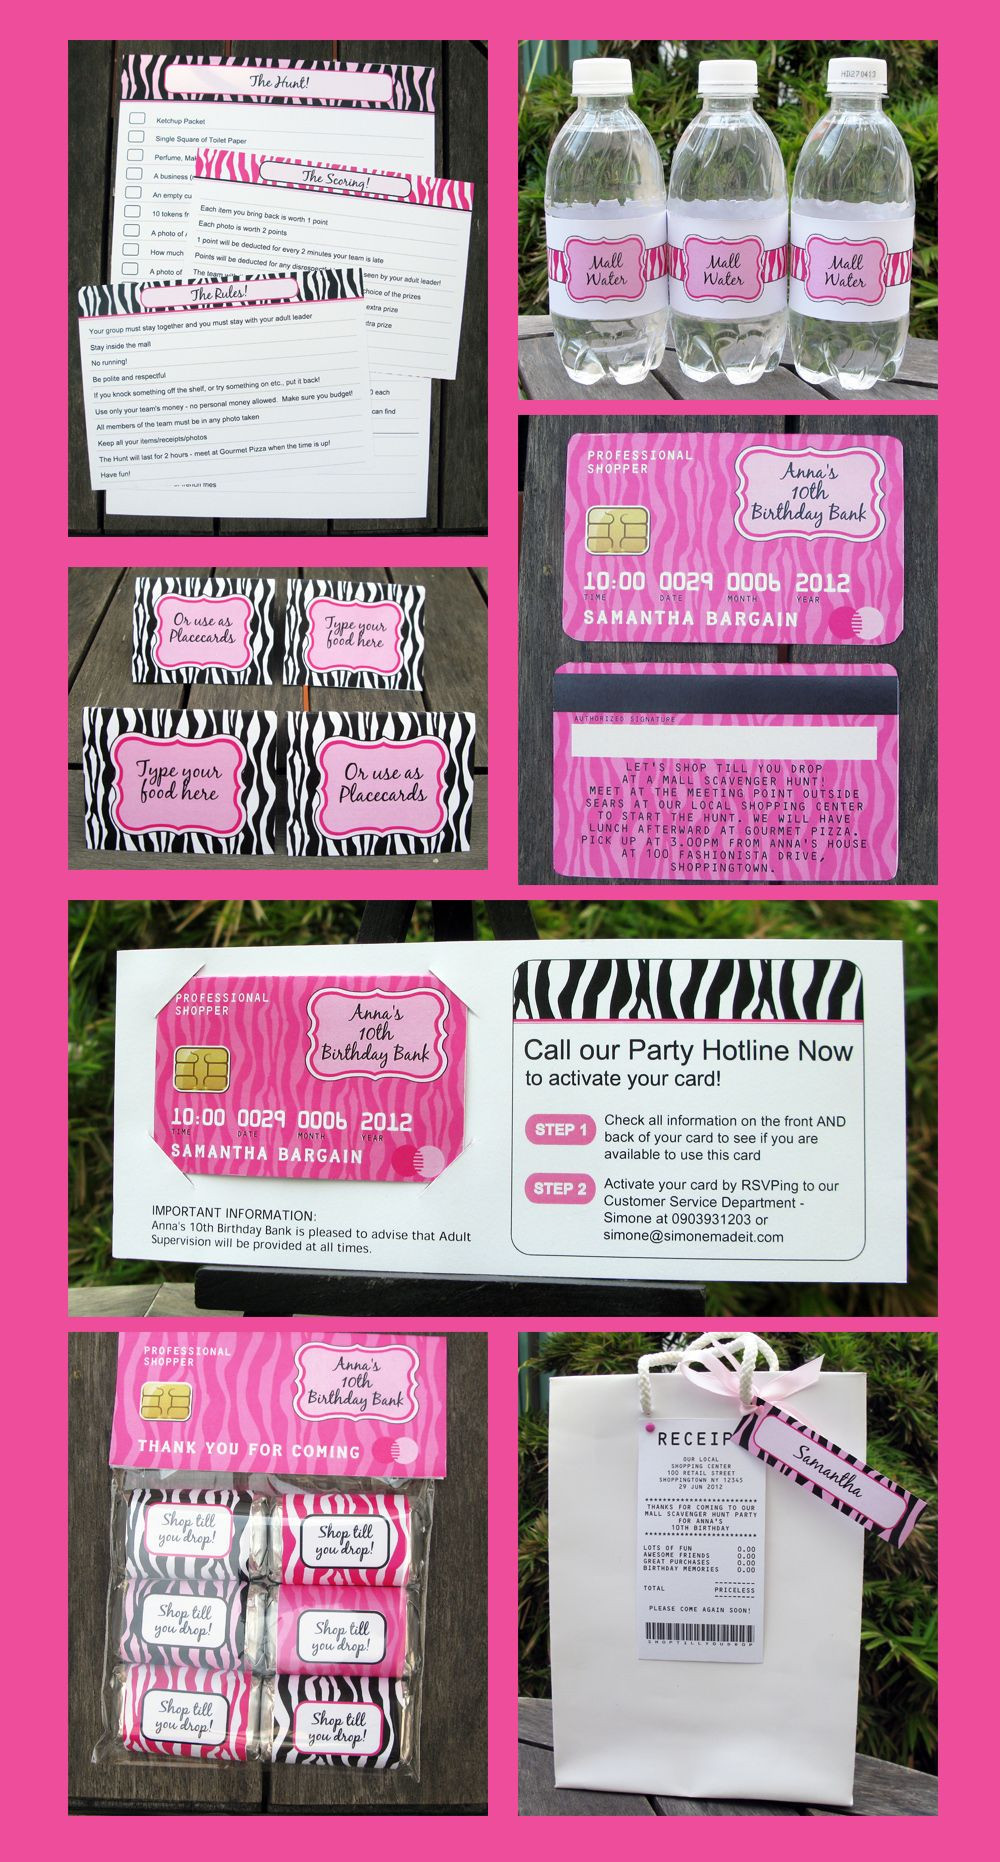 Scavenger Hunt Birthday Party Ideas
 Mall Scavenger Hunt Party Printables & Invitations – pink